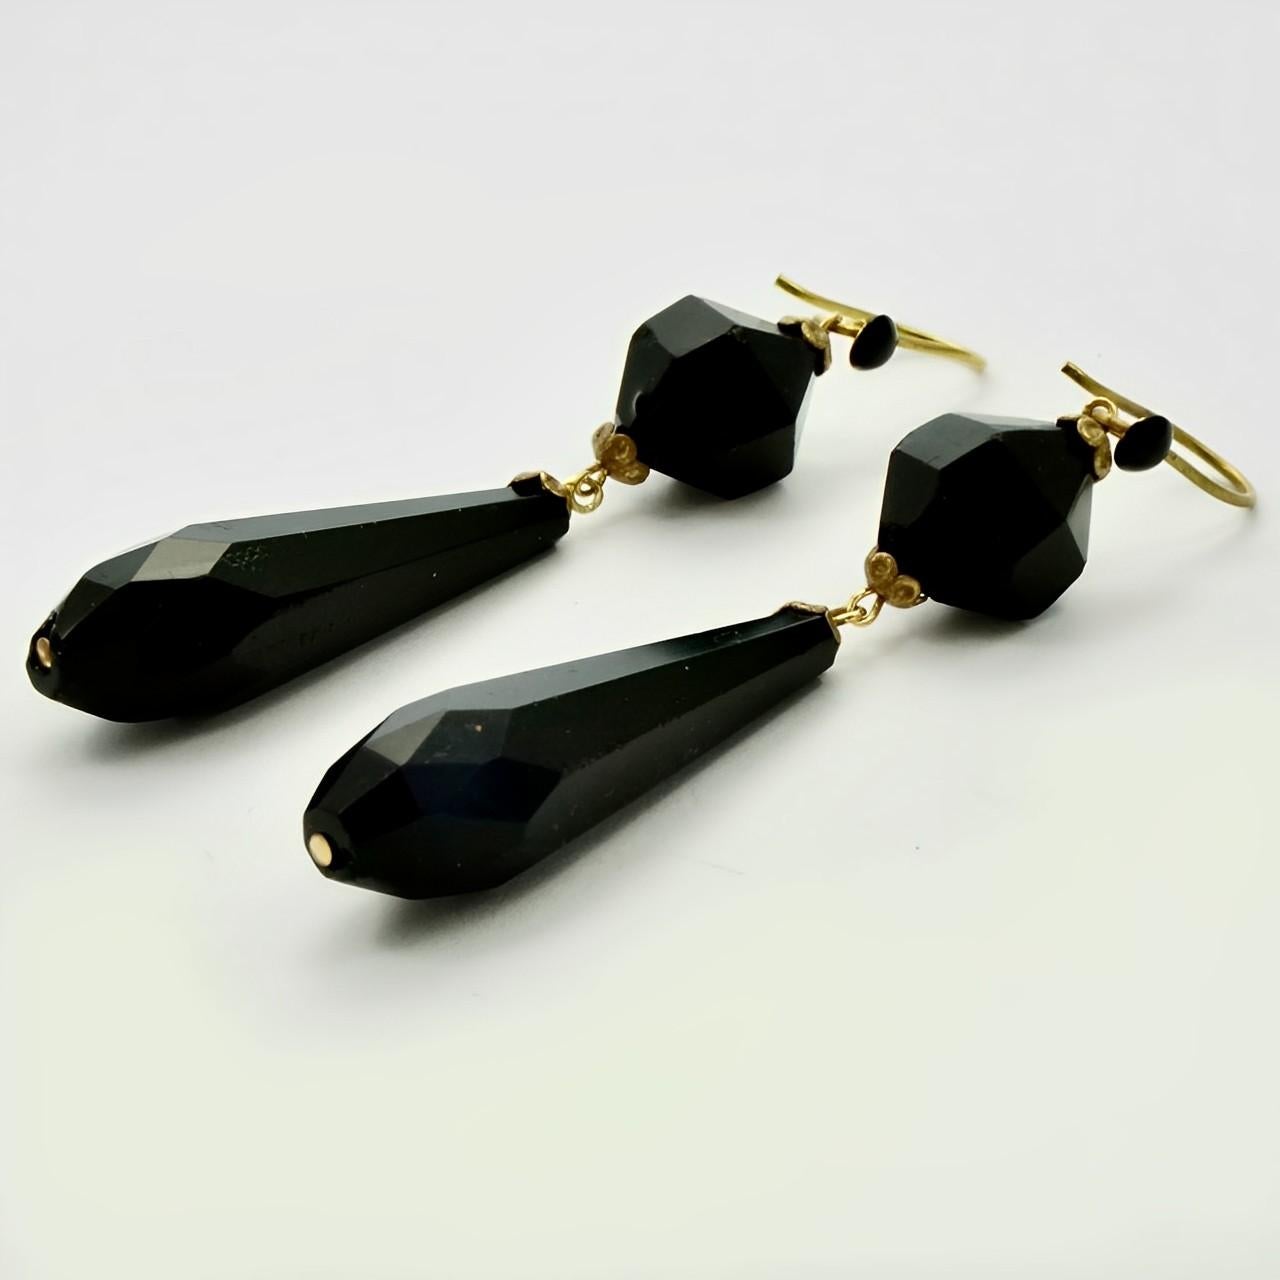 Faceted french jet drop earrings with gold tone hooks. Measuring, including the hooks, length 7.9 cm / 3.1 inches. The earrings are in very good condition. There is some chipping to the french jet.

This is a beautiful pair of classic french jet